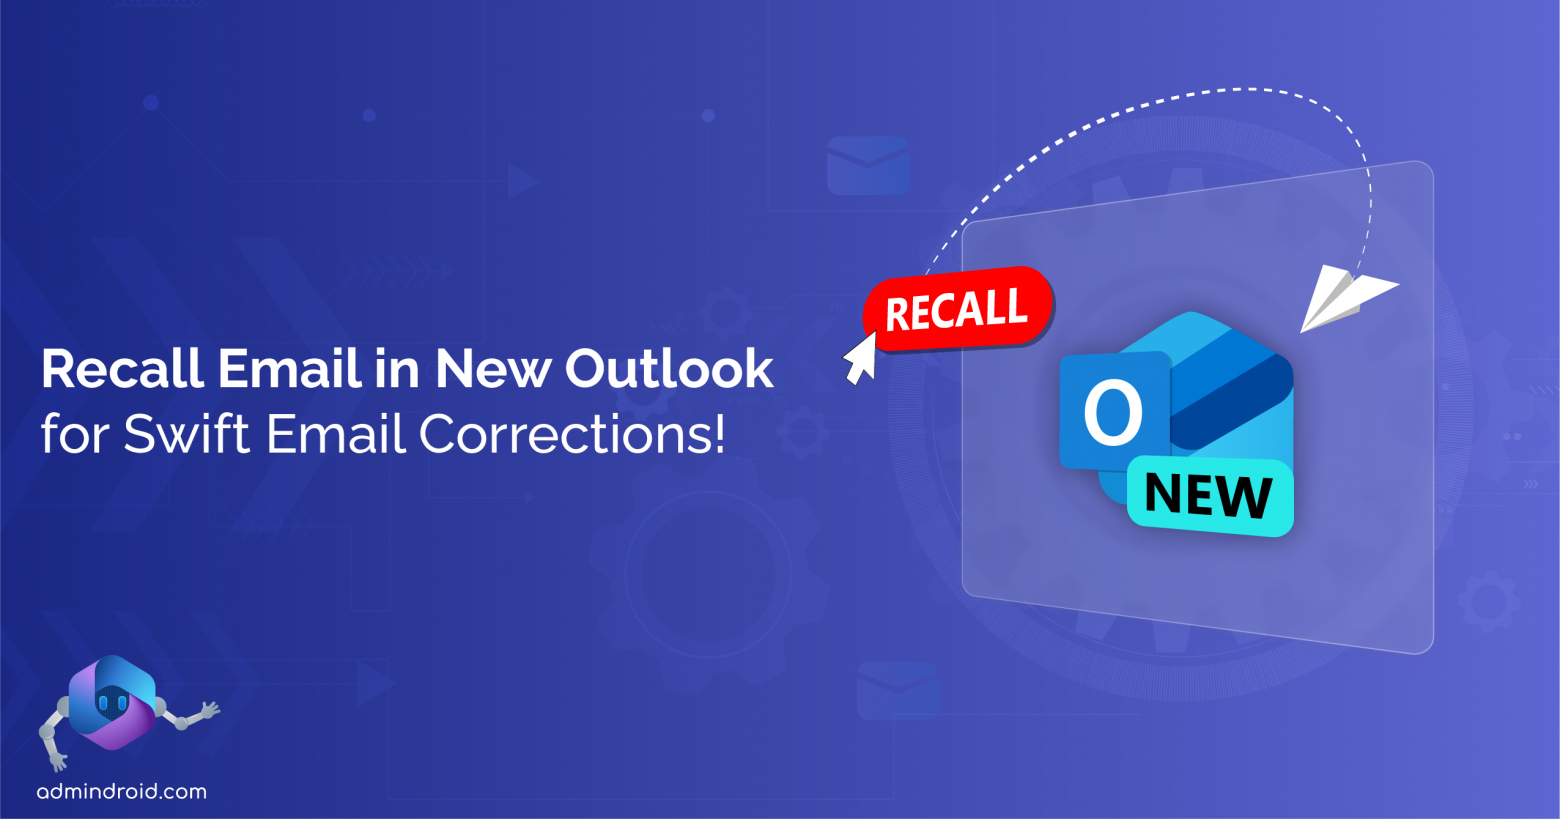 Recall Email in New Outlook for Swift Email Corrections